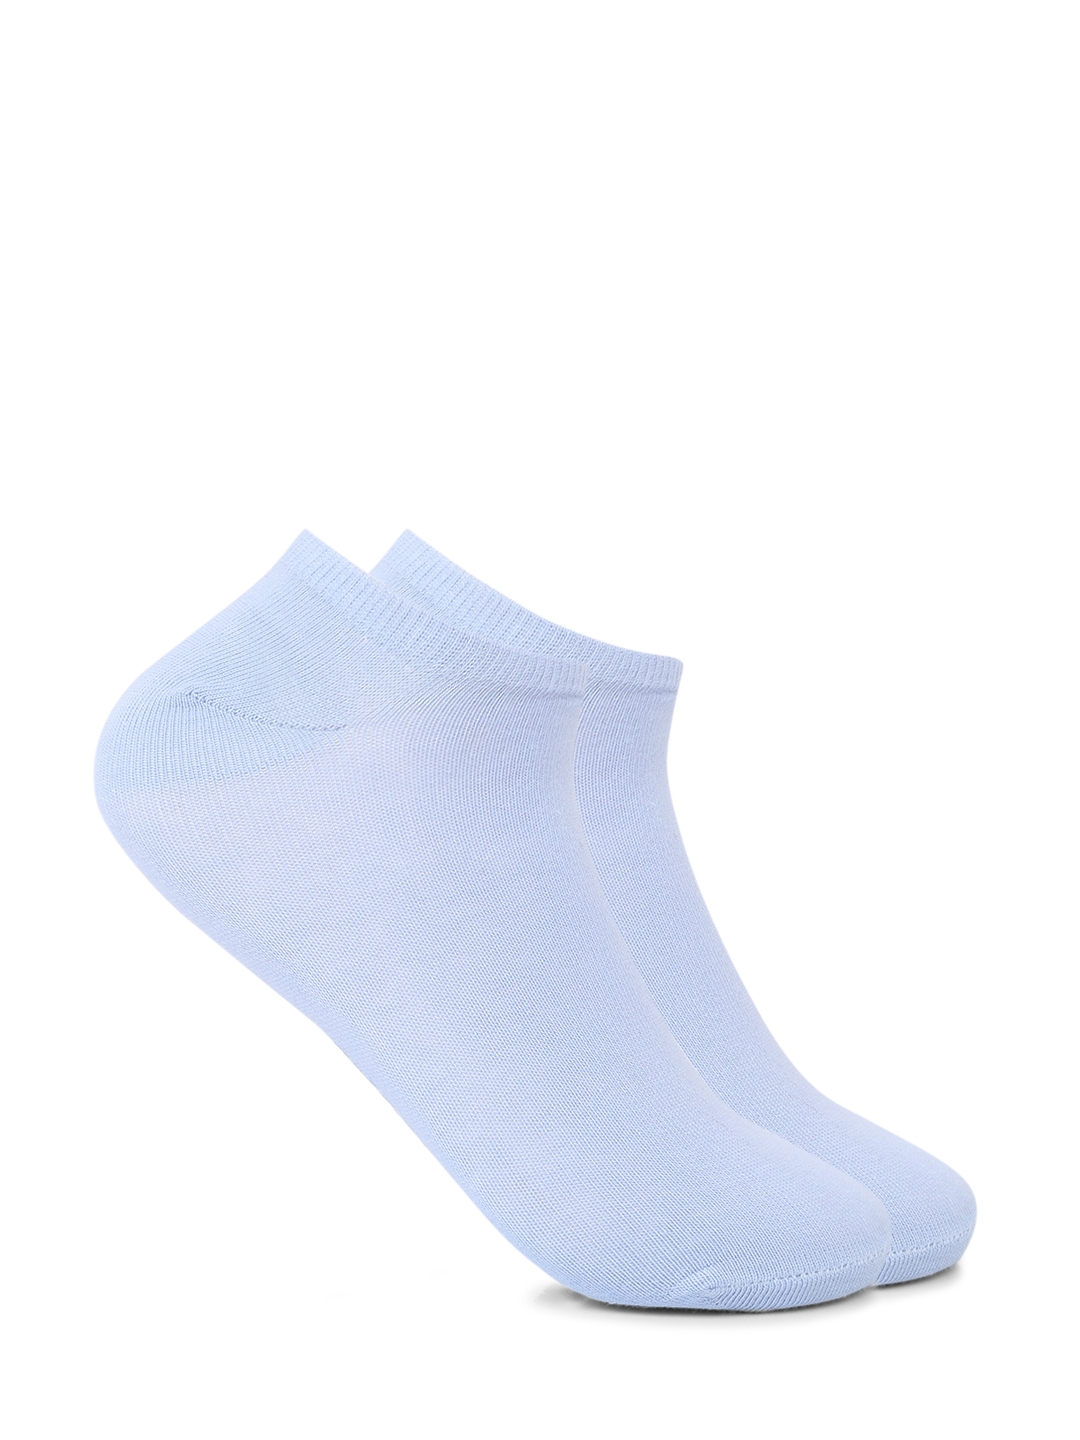 Smarty Pants | Smarty Pants women pack of 2 solid cotton ankle length socks.